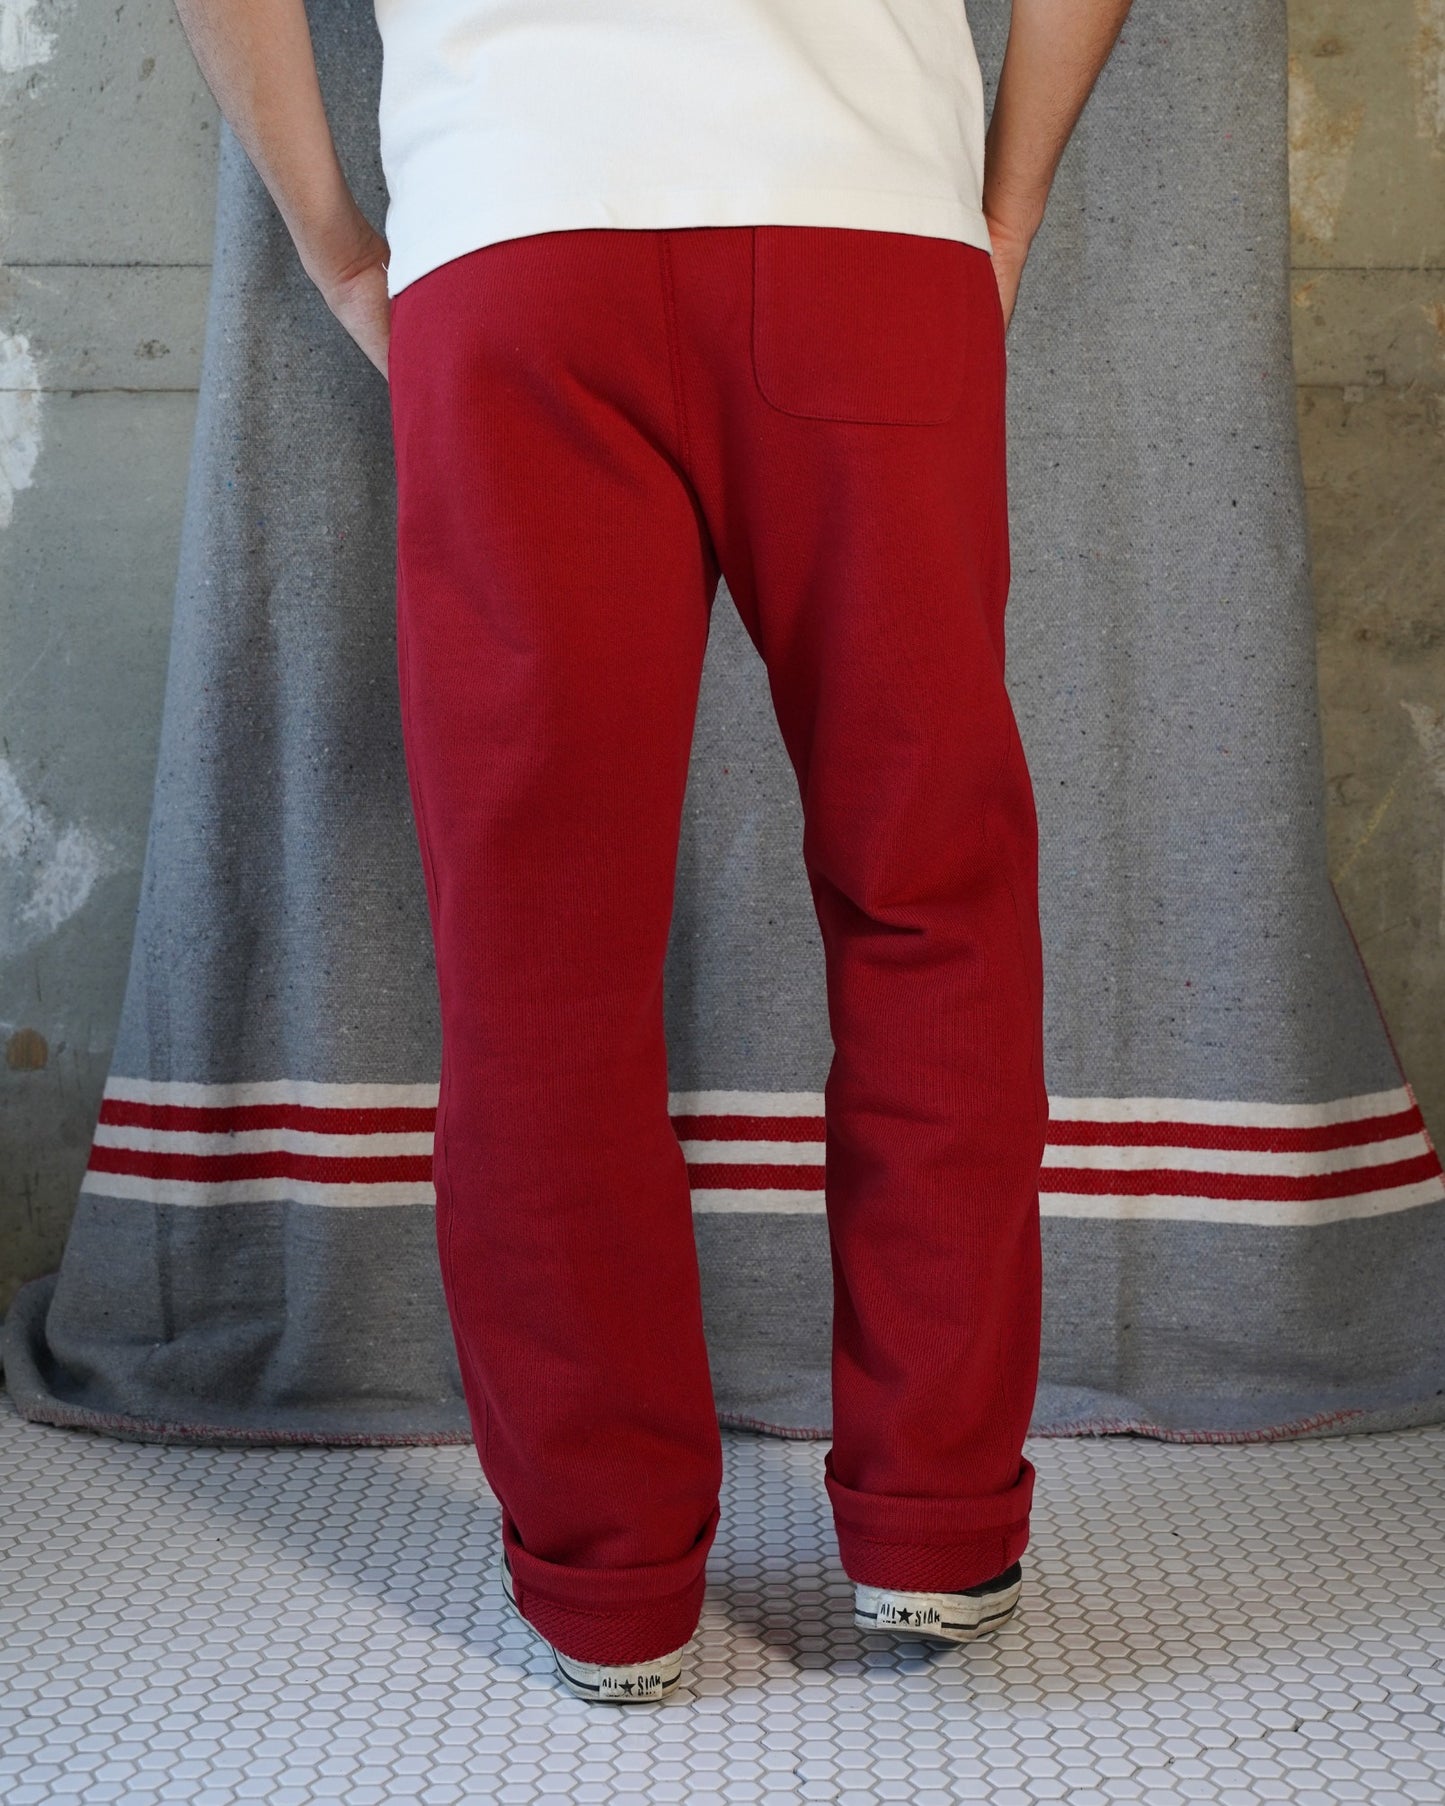 Sweatpants - 701gsm Double Heavyweight French Terry - Red